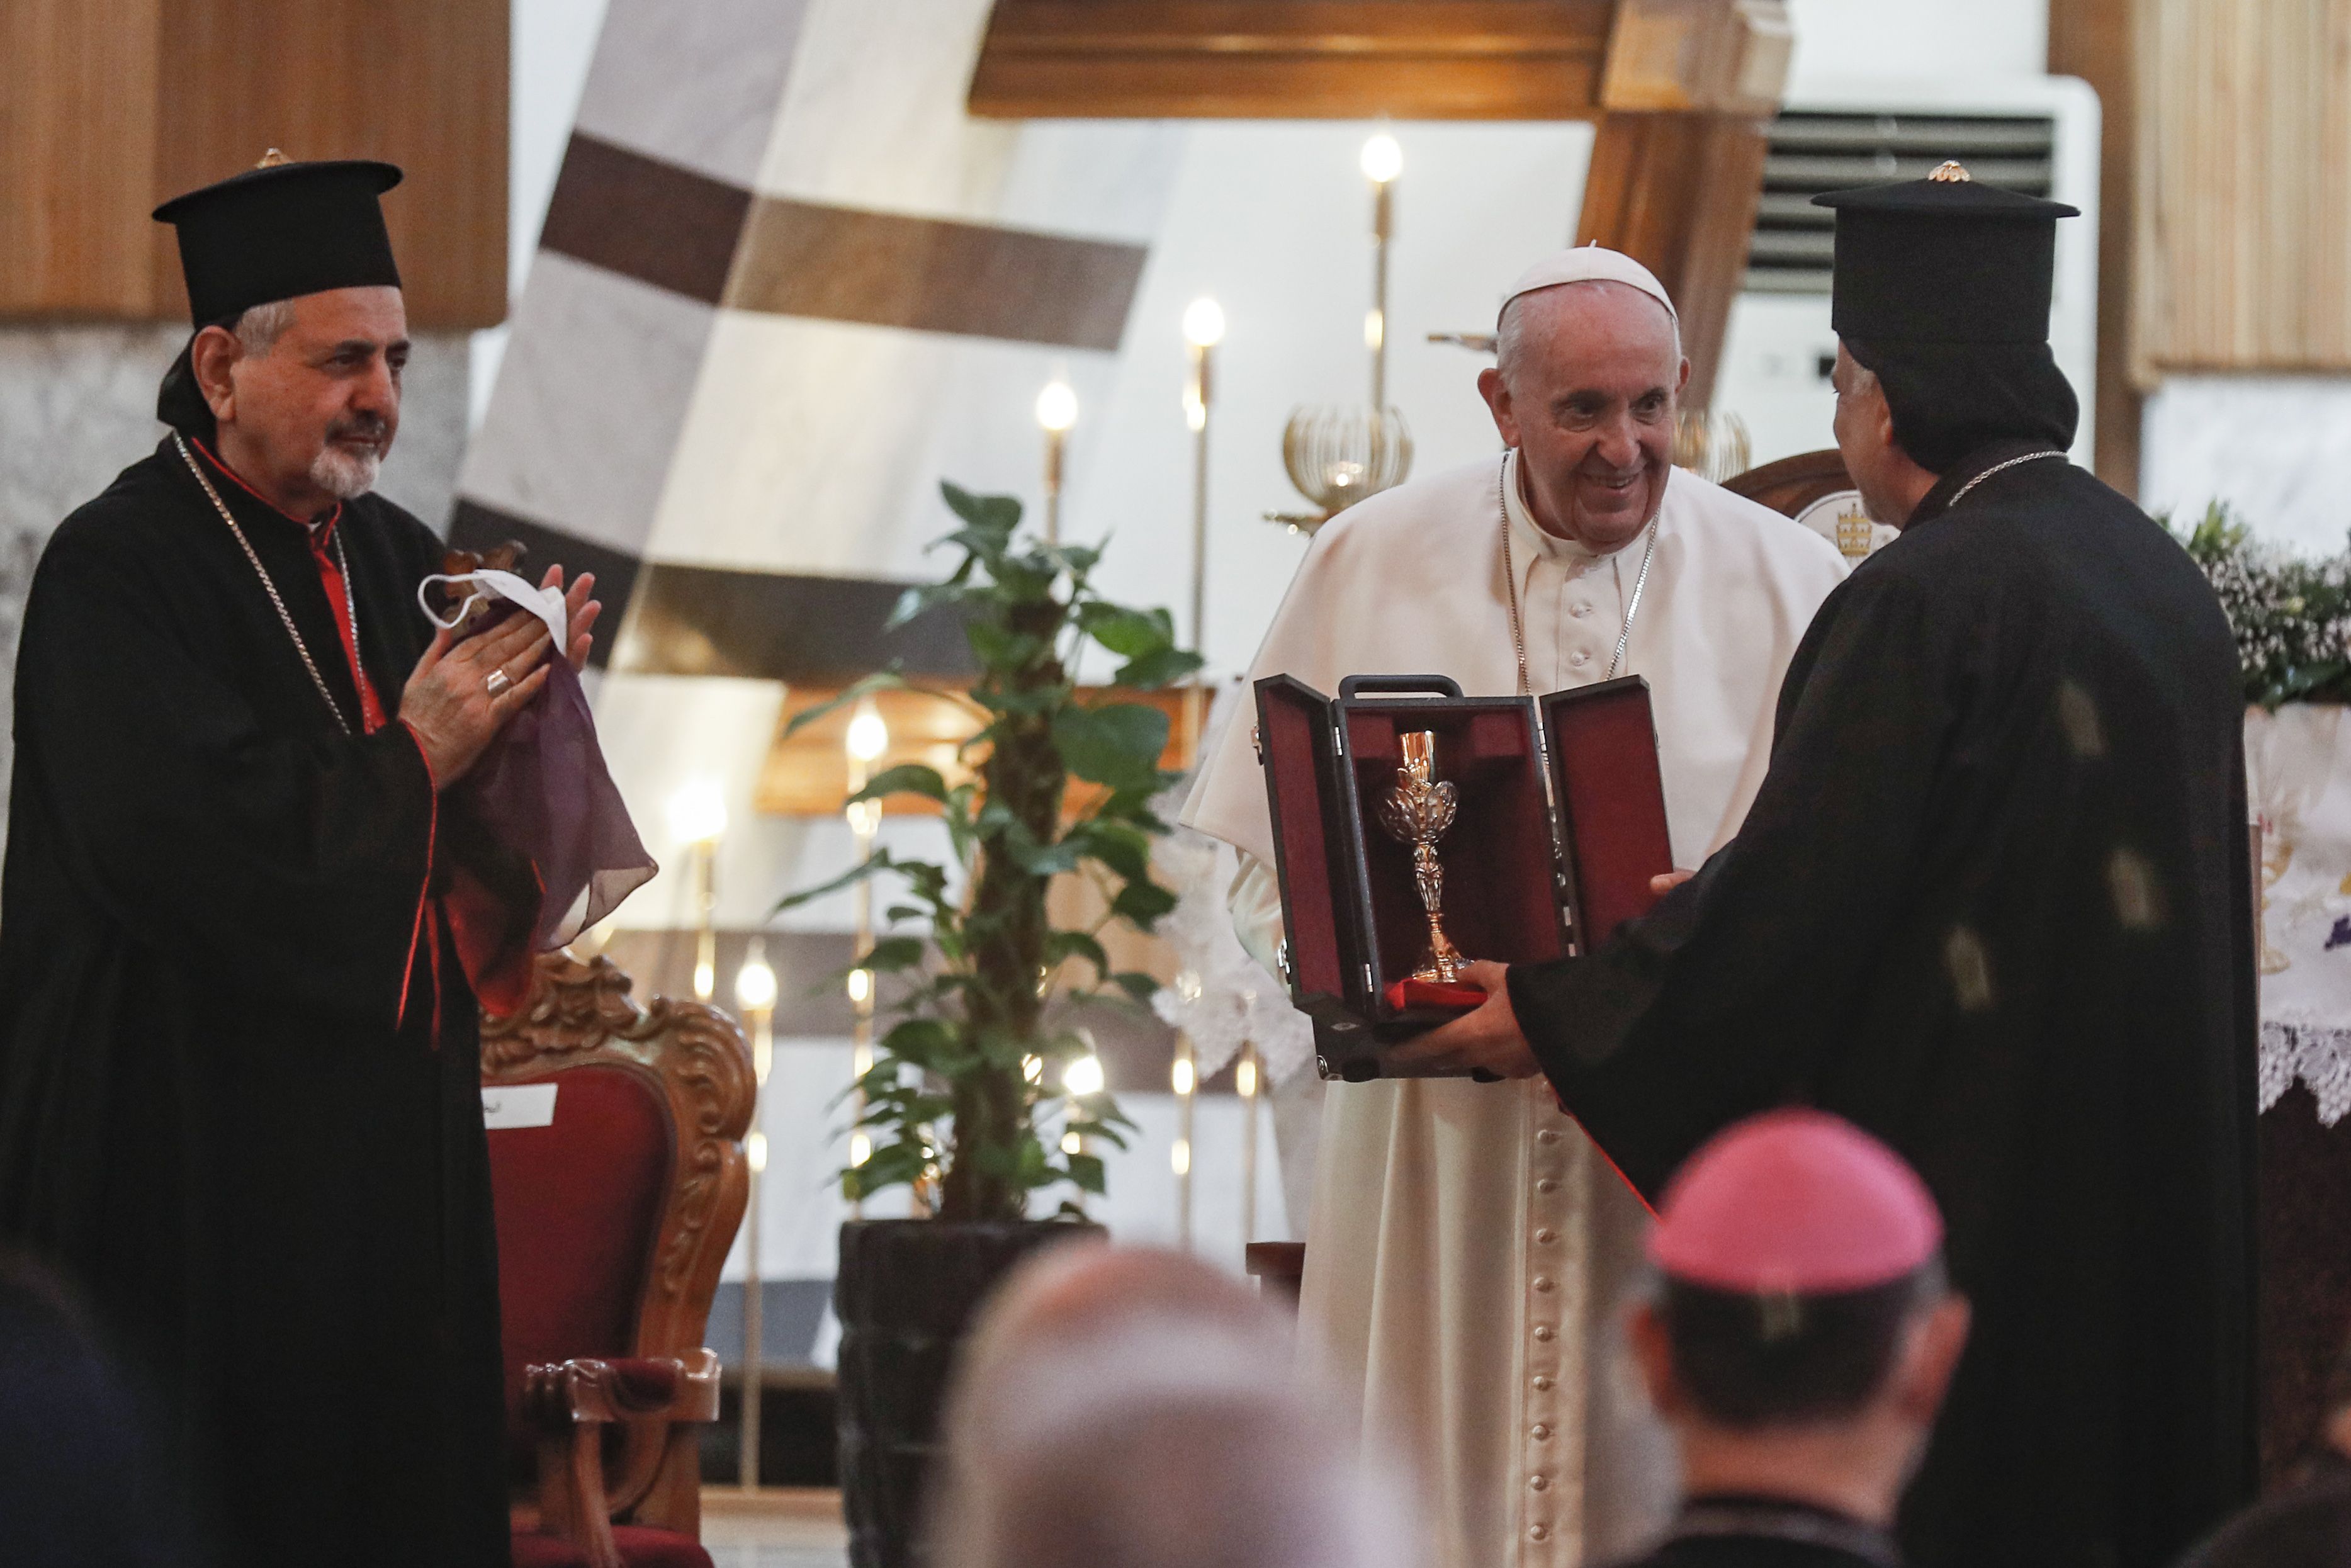 Picture of the Pope receiving an ornamental candlestick gift 